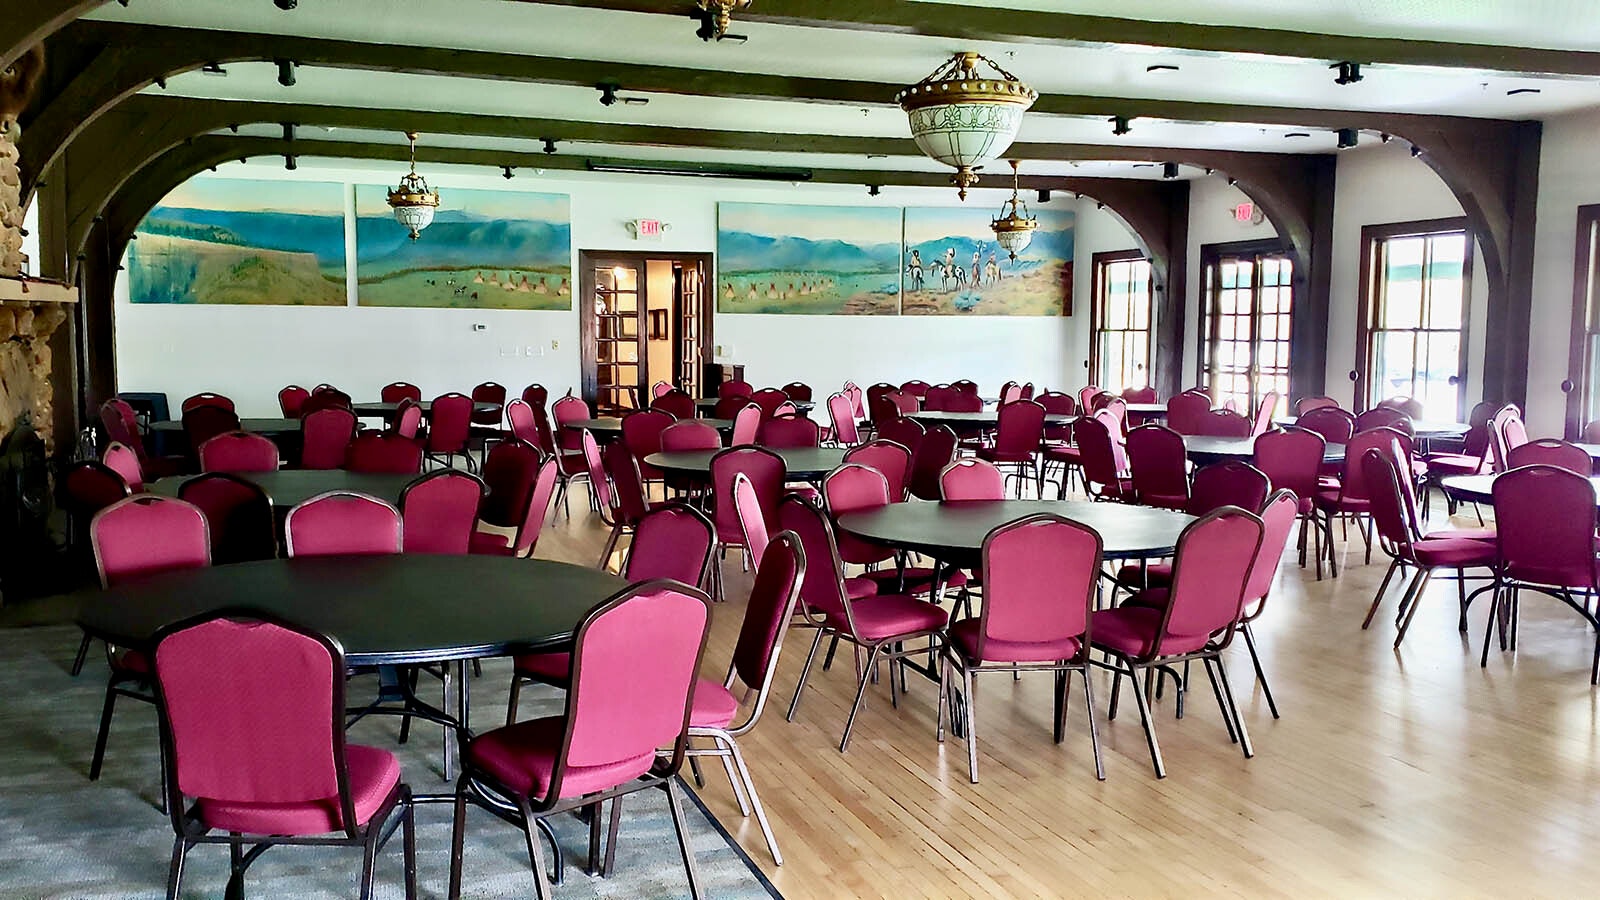 A series of wooden ribs just like those of a ship make the Sheridan Inn's former dance hall, now banquet space, extra sturdy.